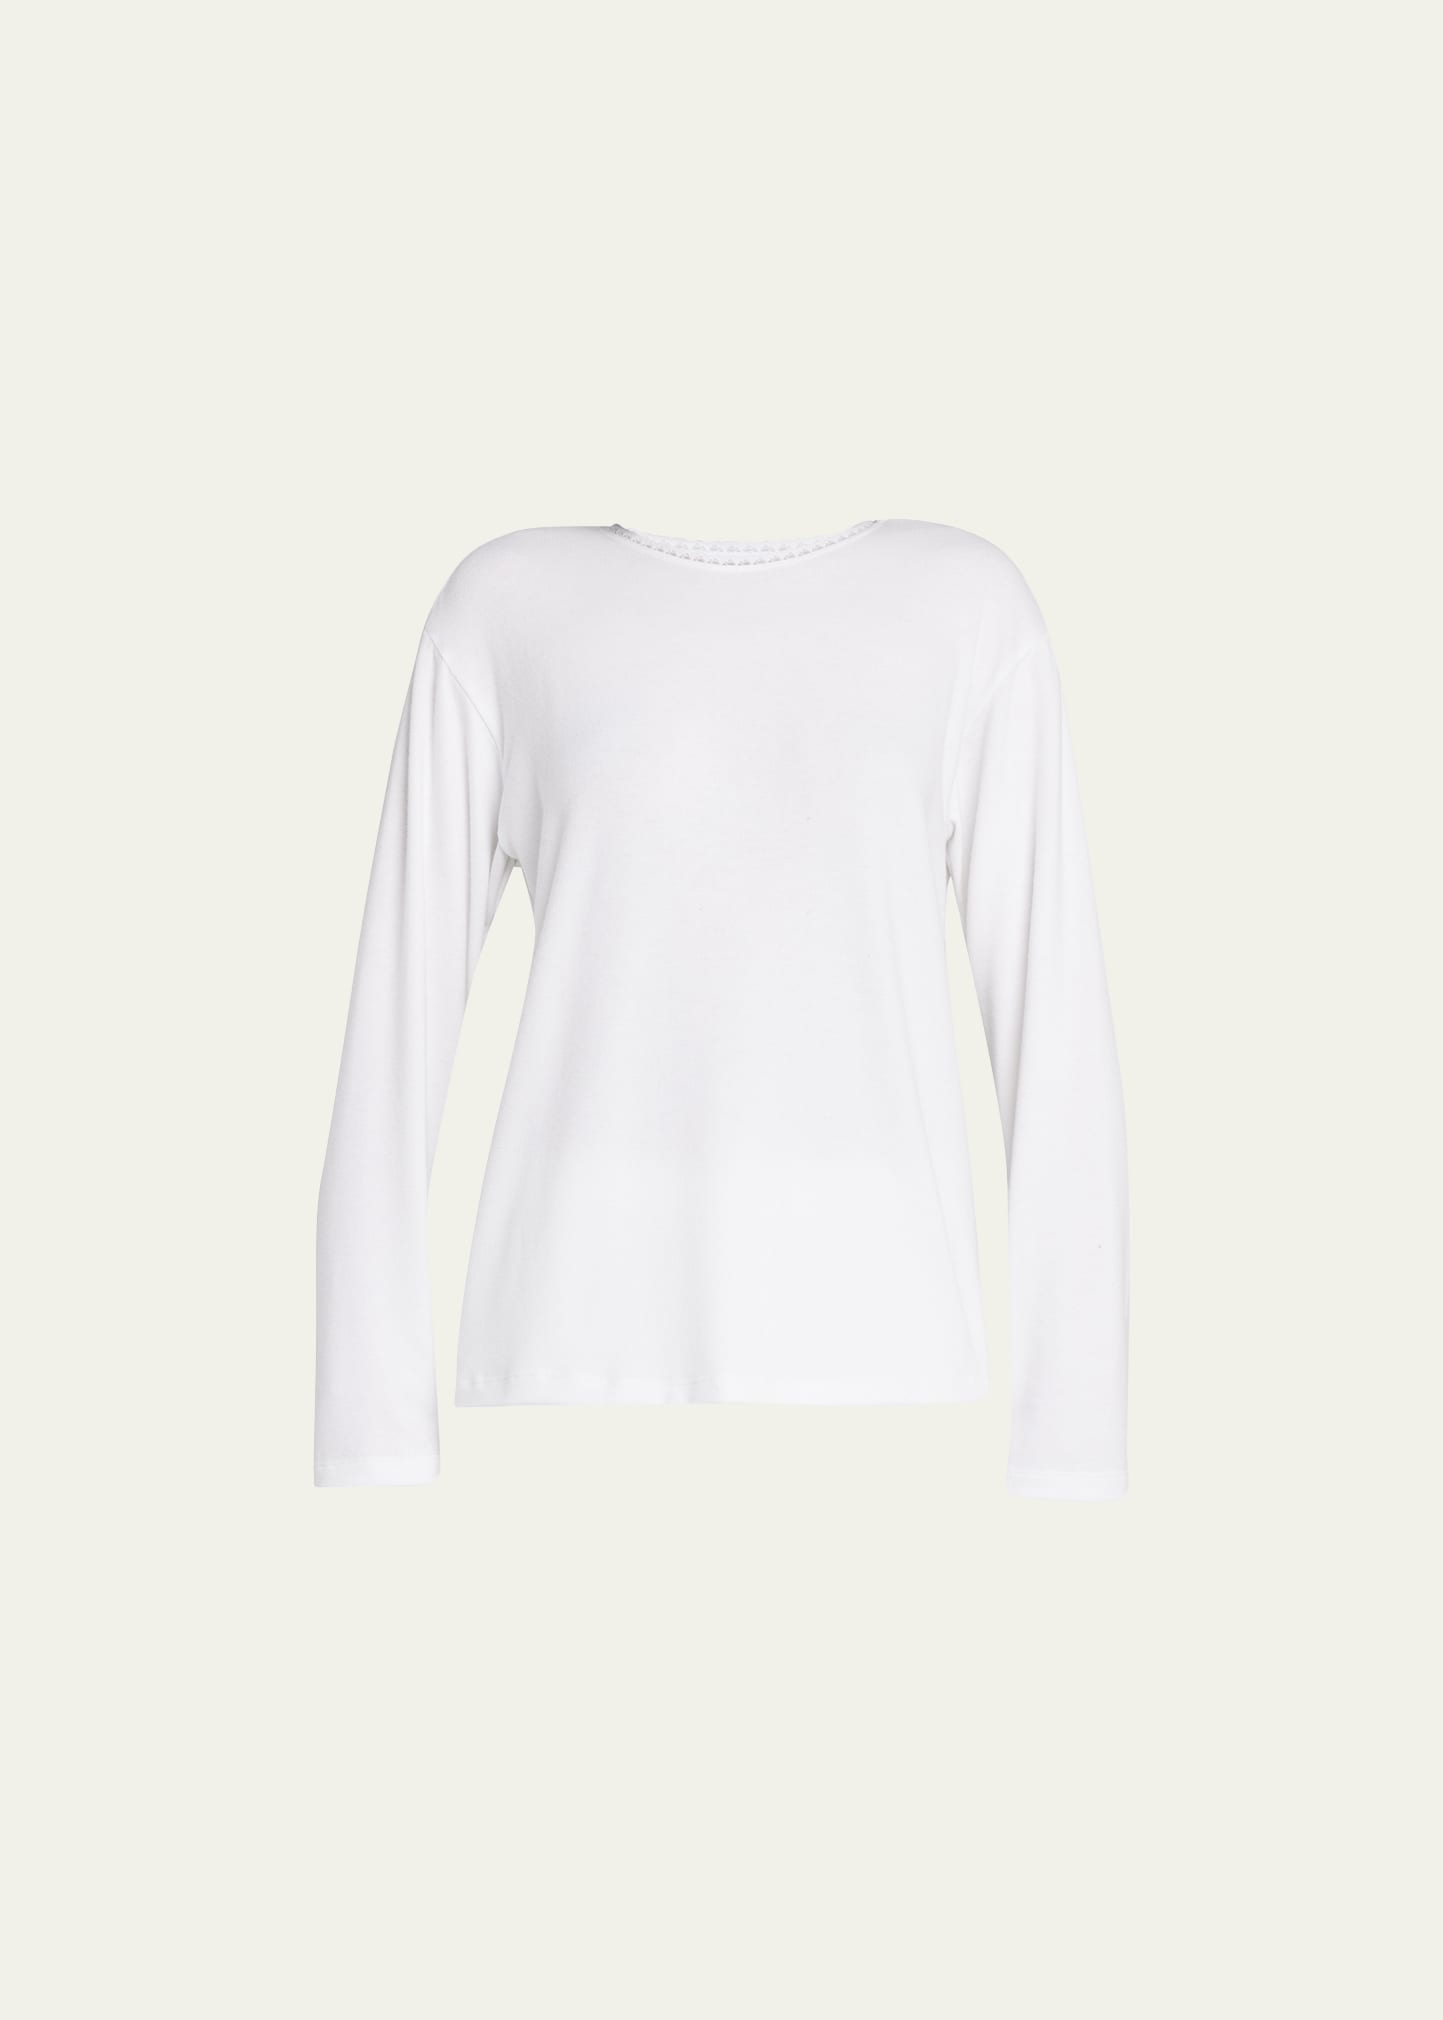 Andine Seraphina Lace-Trim Long-Sleeve T-Shirt